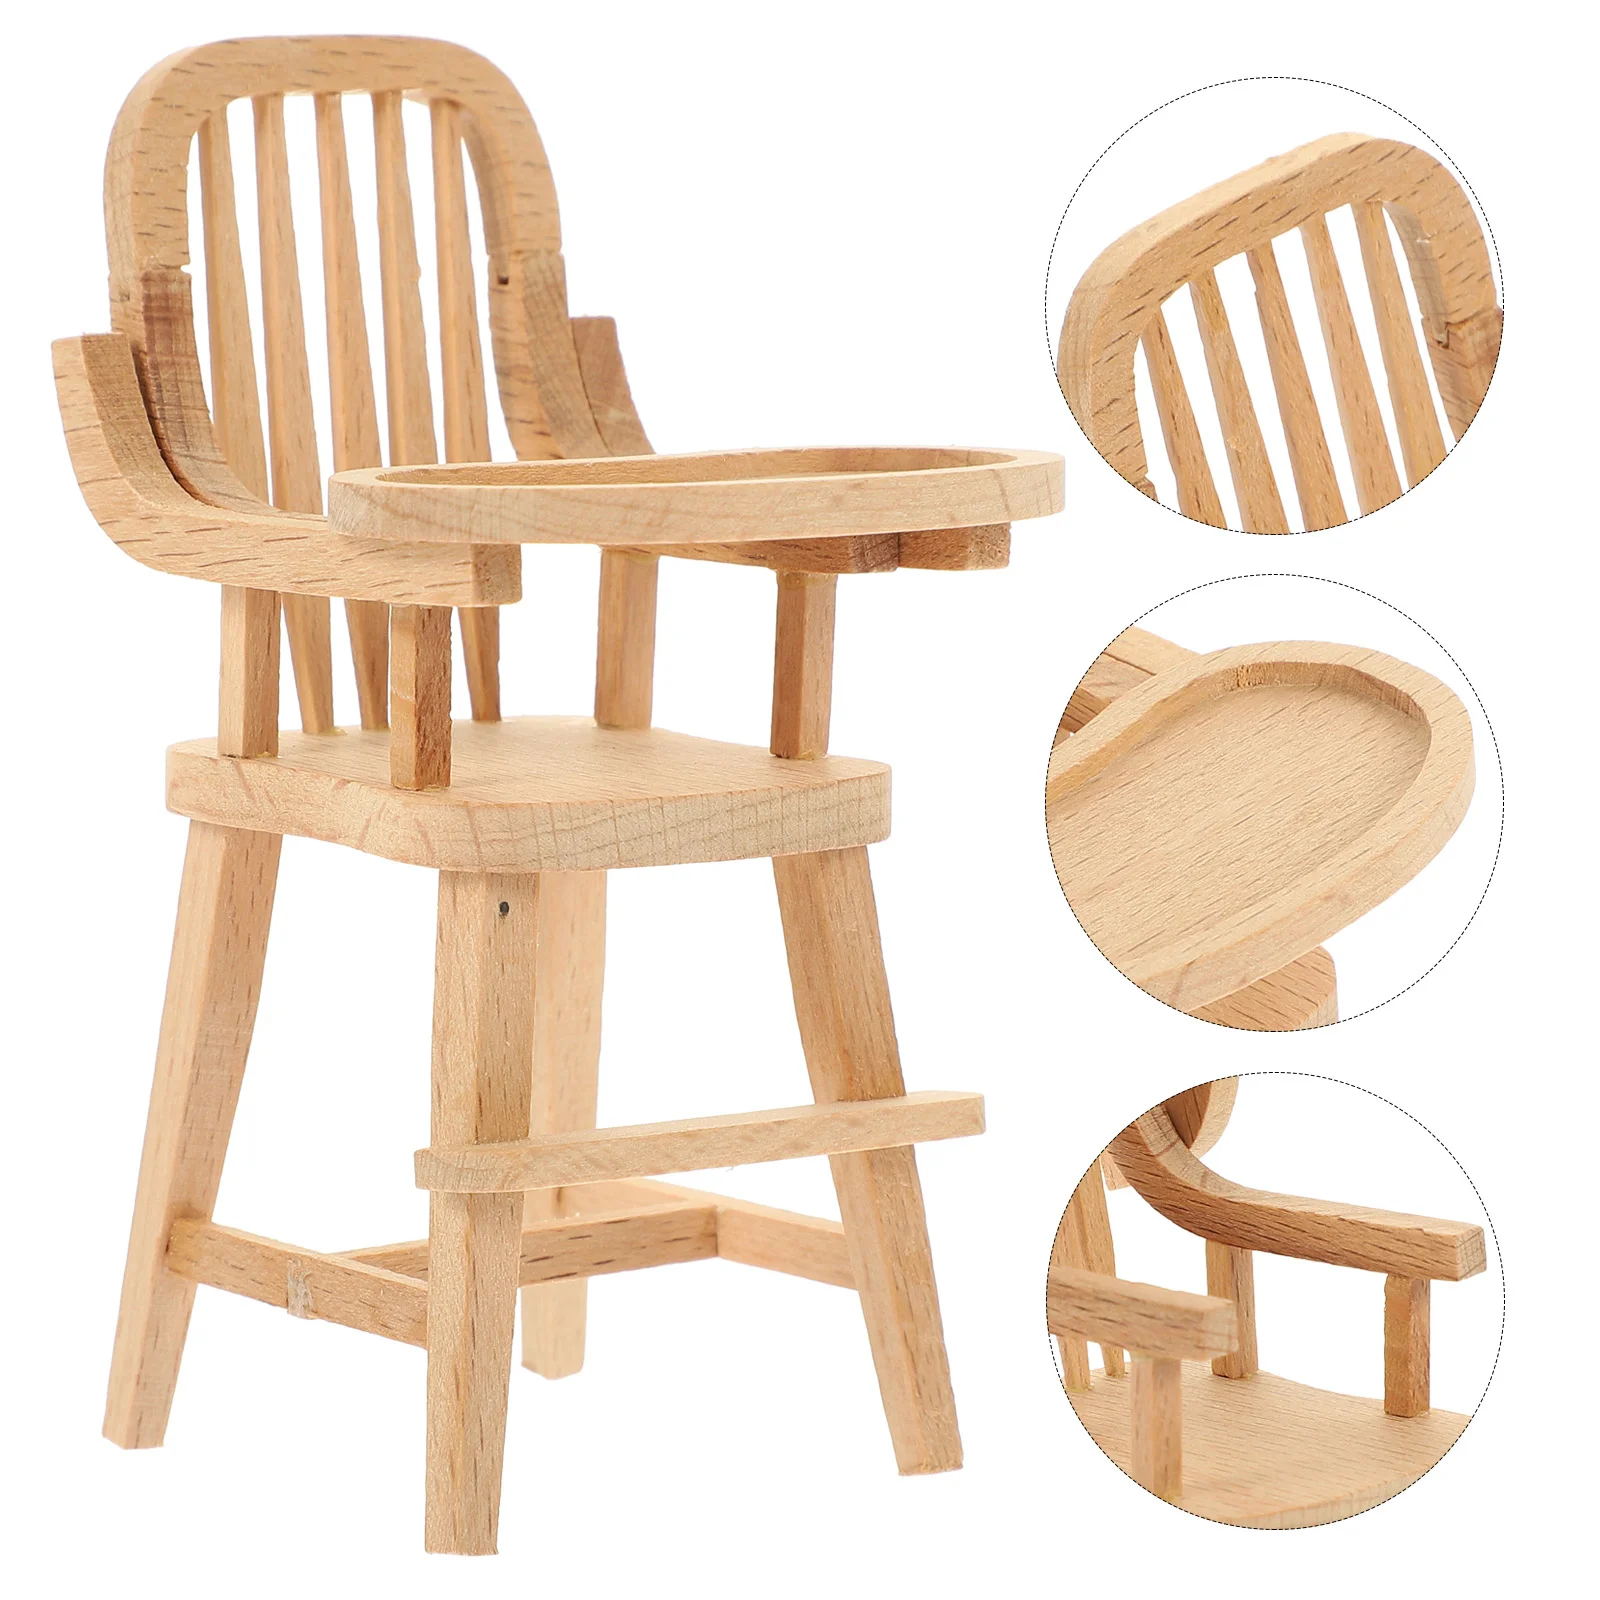 

Wooden Baby Toys Dollhouse Dining Table Adorable Miniature Highchair Kids Model Simulated Chairs Child Children's with